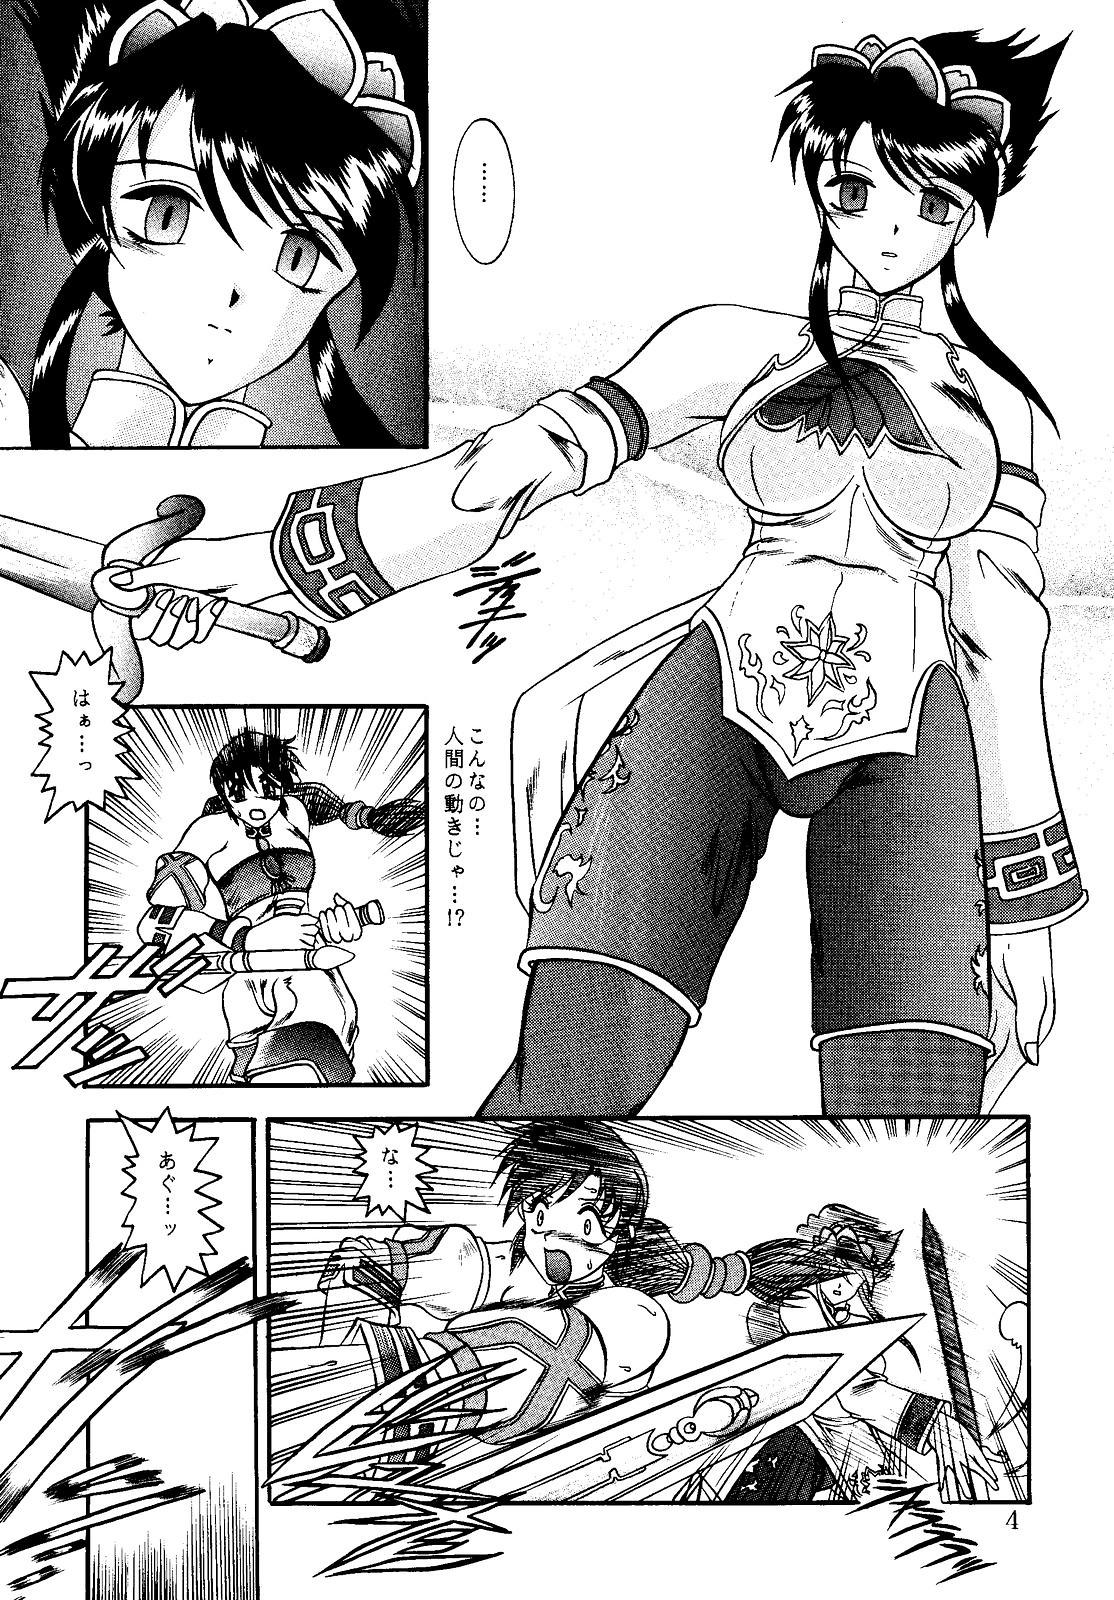 Sharing Butterfly Kiss - Soulcalibur Gay Shorthair - Page 4